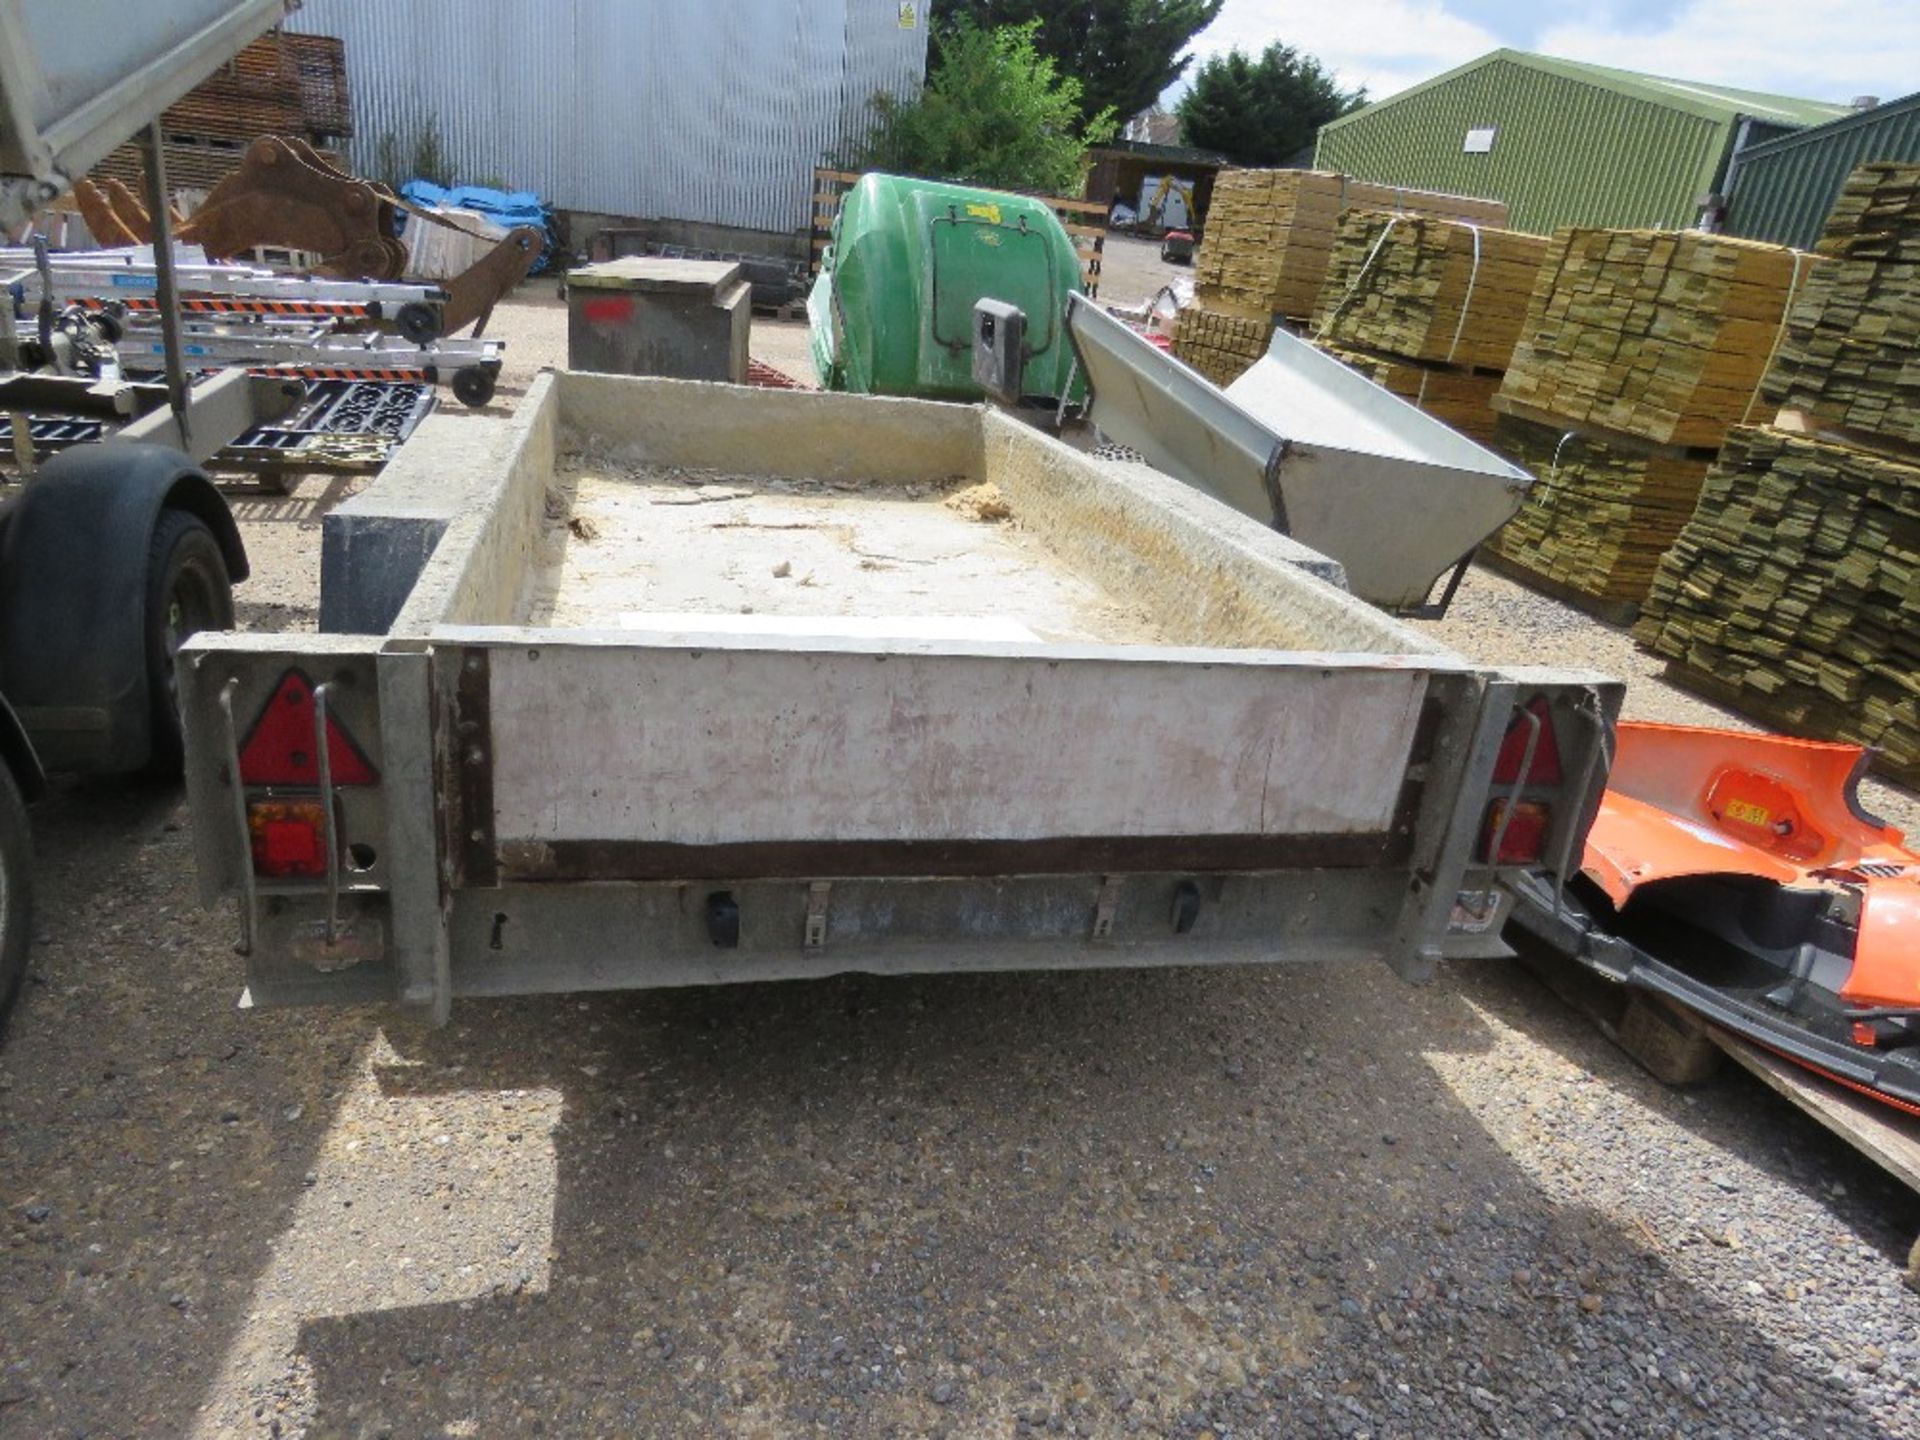 INDESPENSION TYPE TWIN AXLED PLANT TRAILER 8FT X 4FT APPROX. ID:A247098/JUPPDT04. DIRECT FROM UTILIT - Image 8 of 9